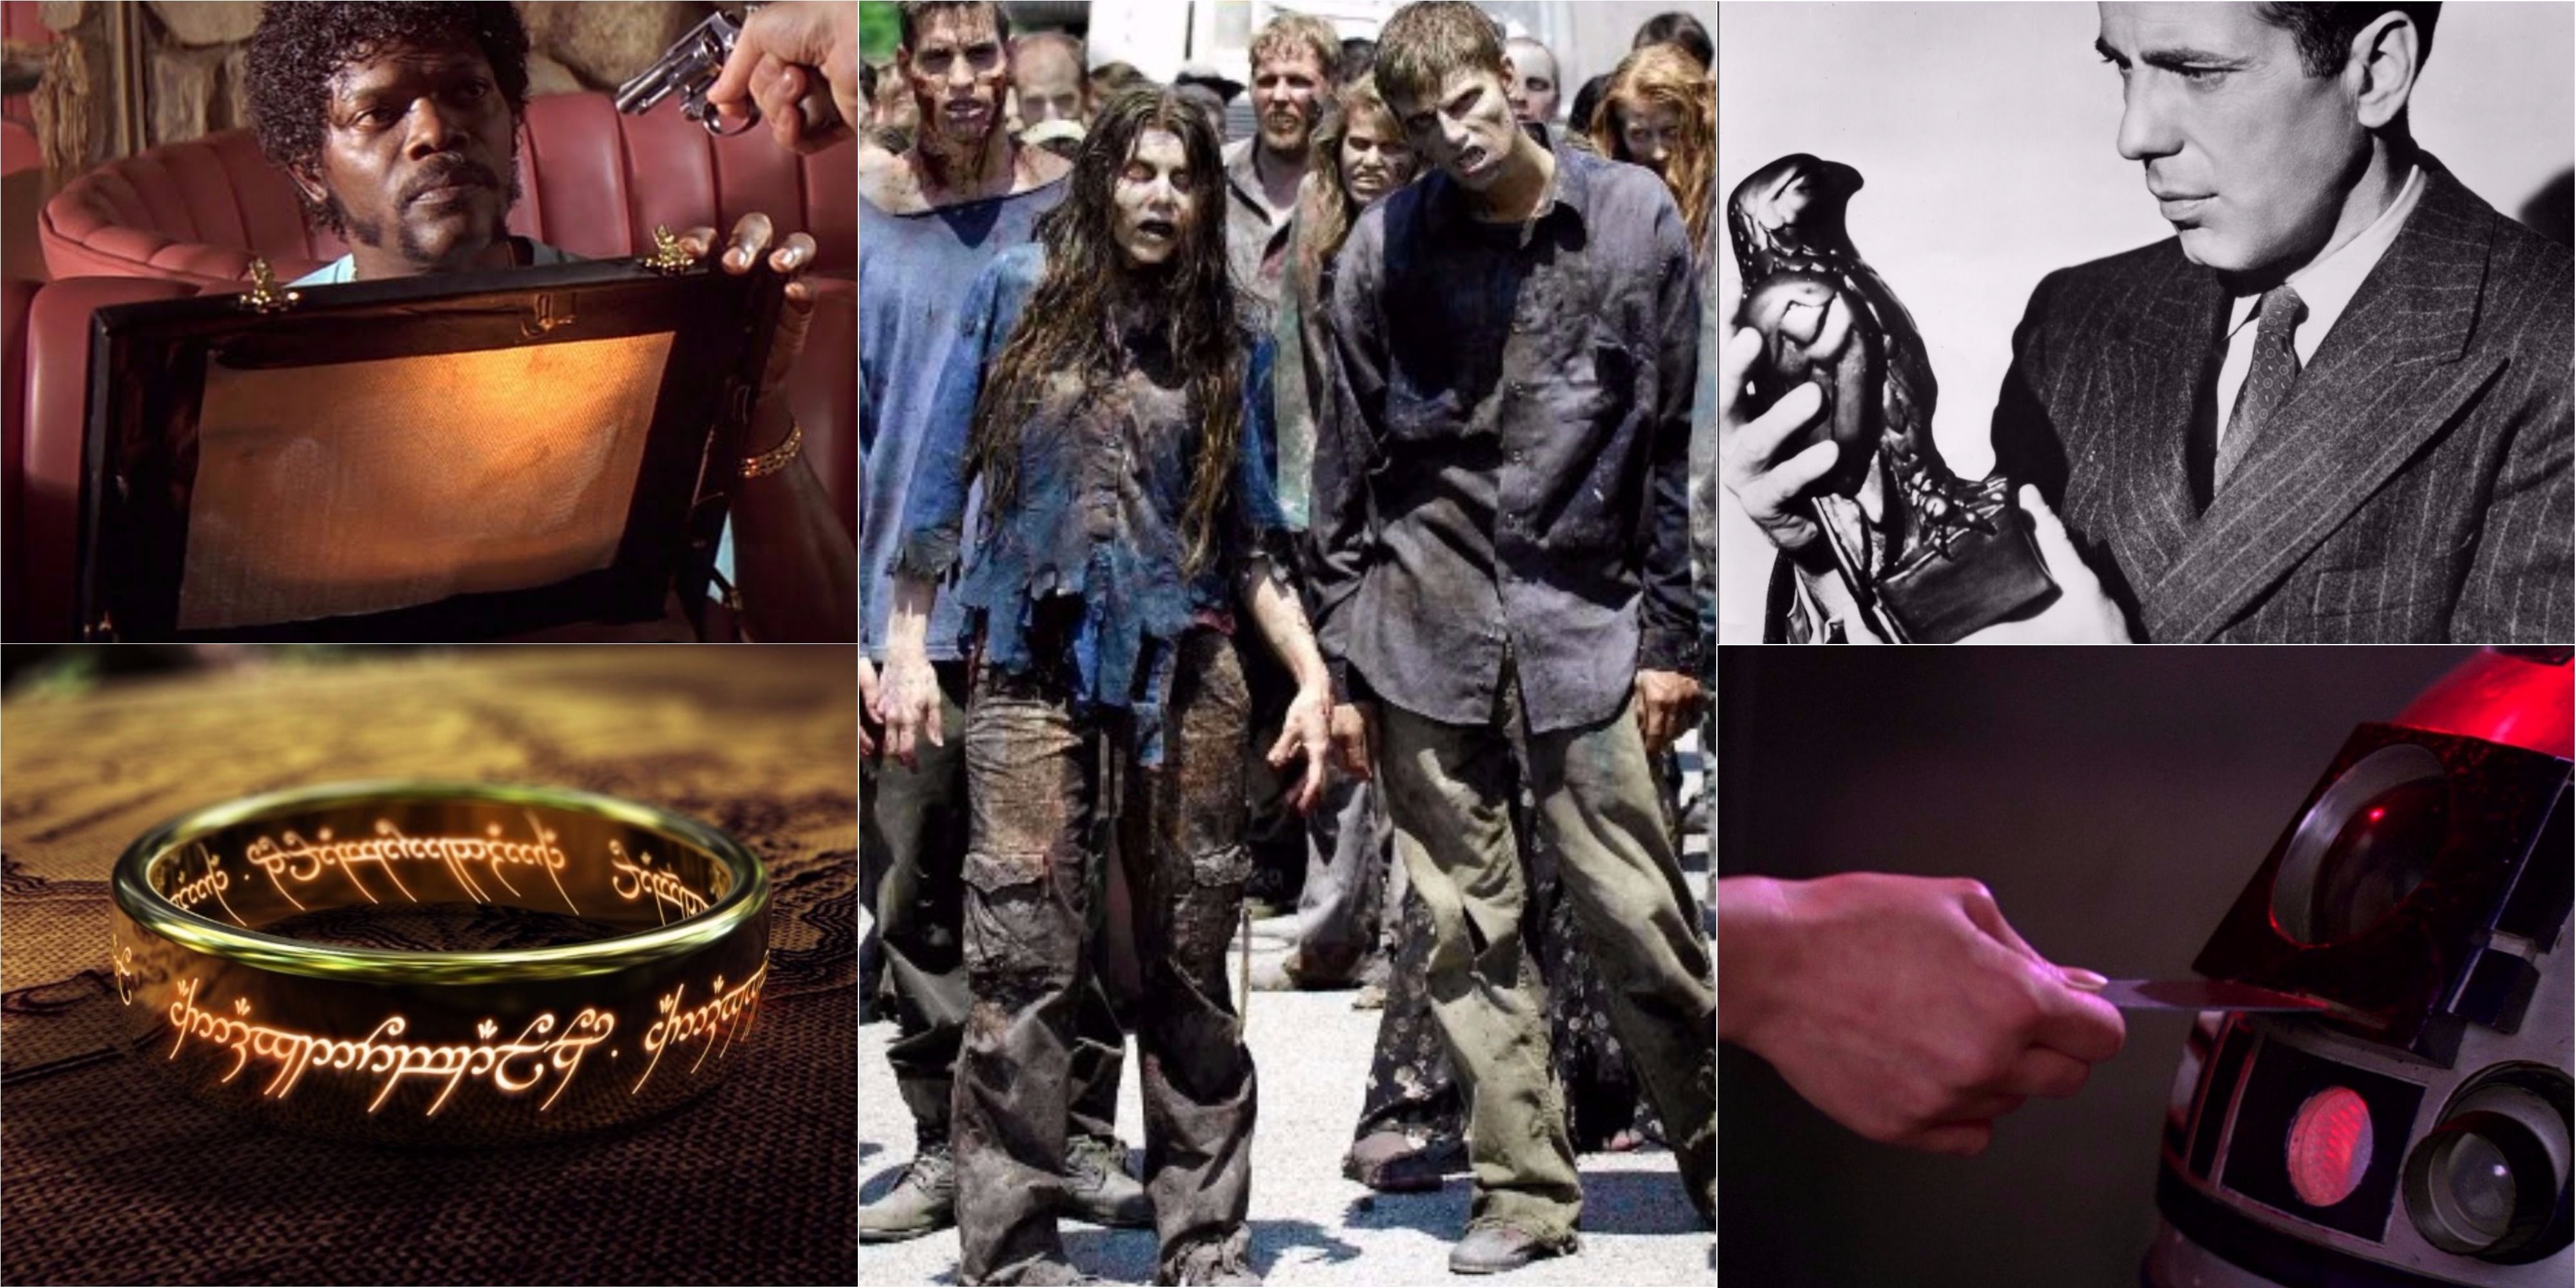 MacGuffin Collage with Walking Dead Zombies in the center